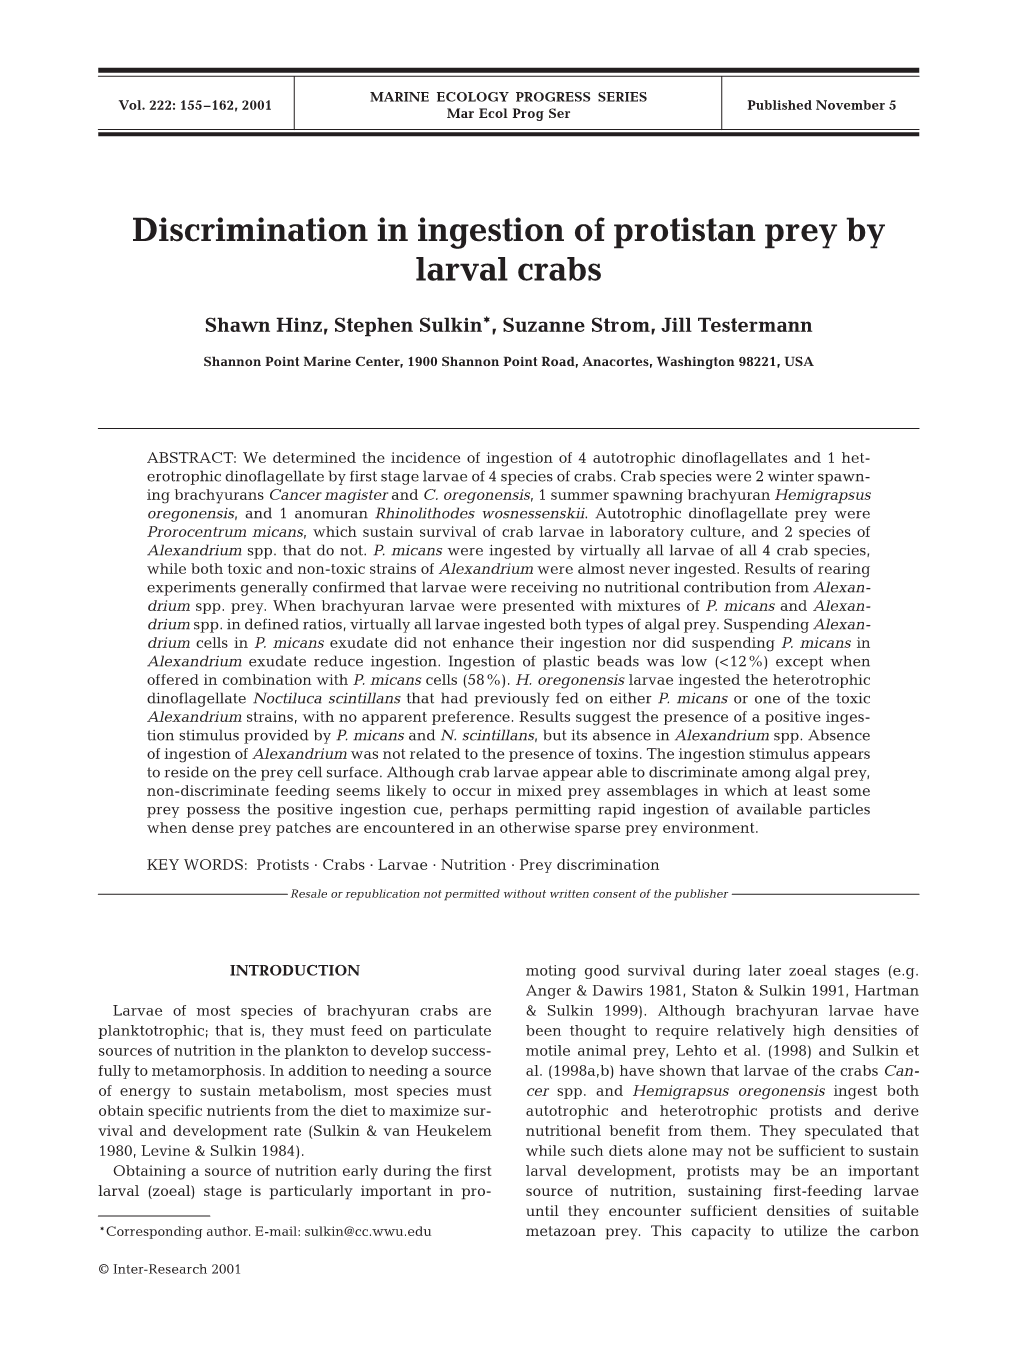 Discrimination in Ingestion of Protistan Prey by Larval Crabs